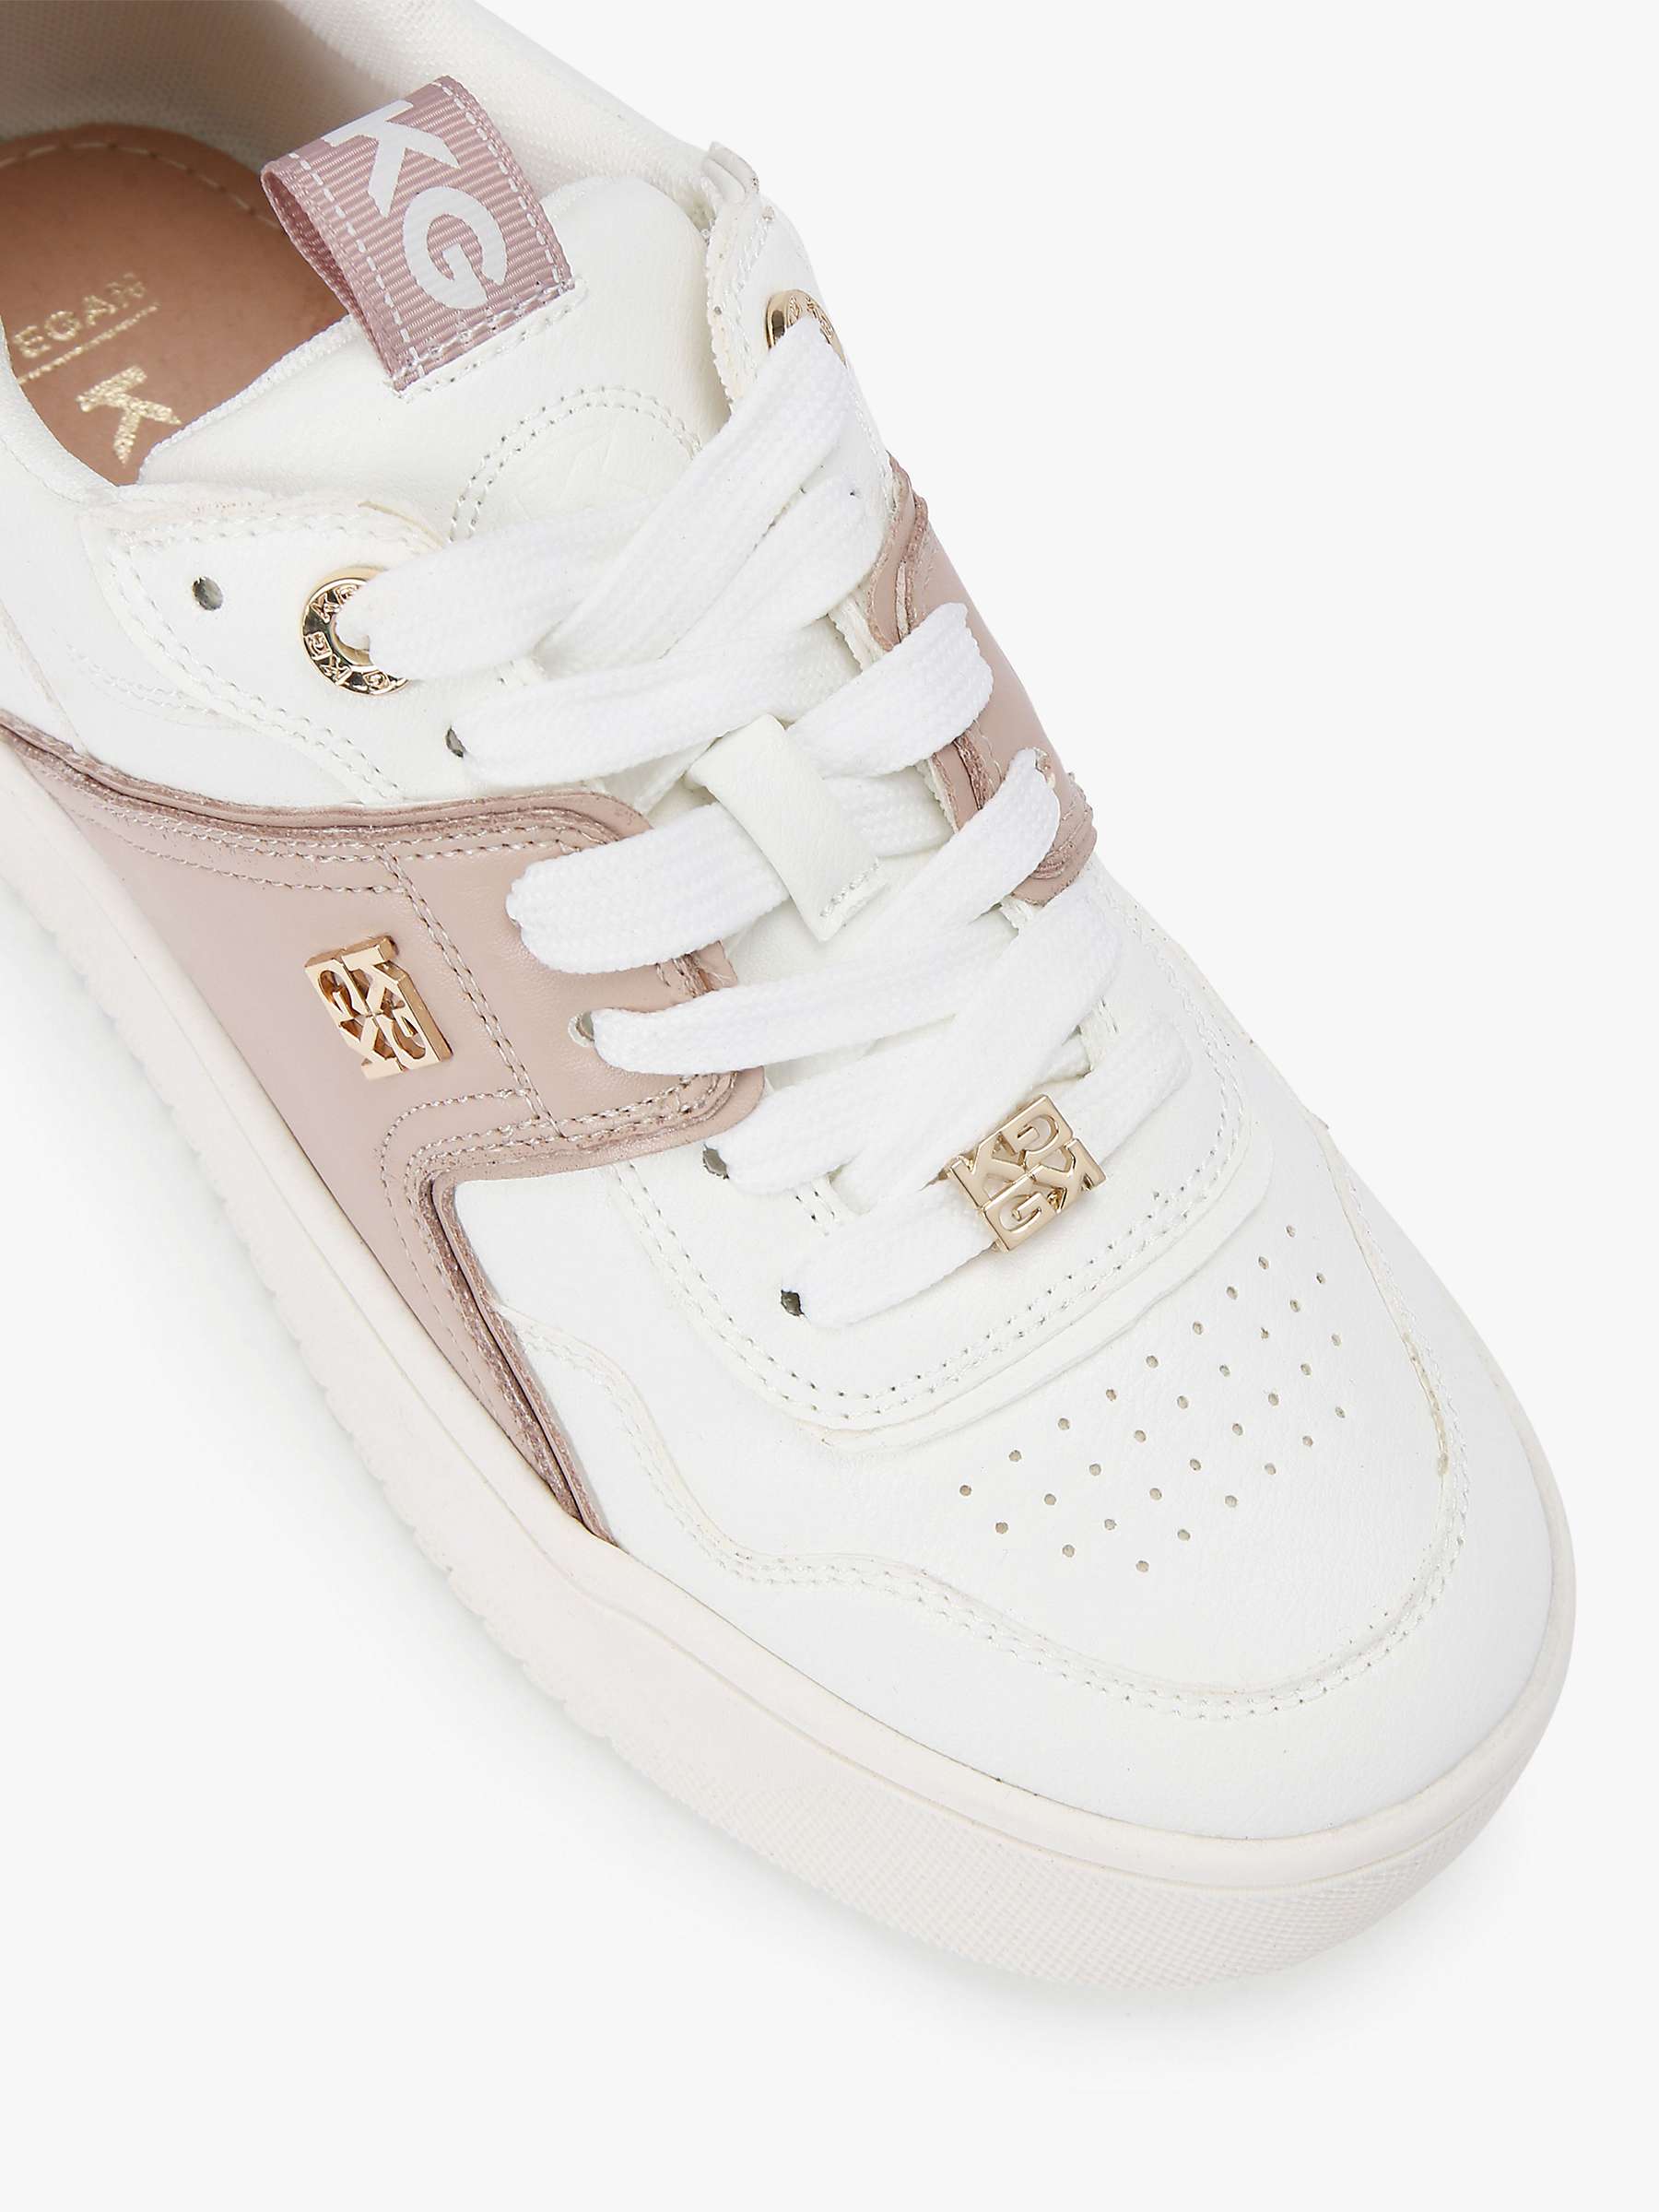 KG Kurt Geiger Lyra Lace Up Trainers, White/pink at John Lewis & Partners